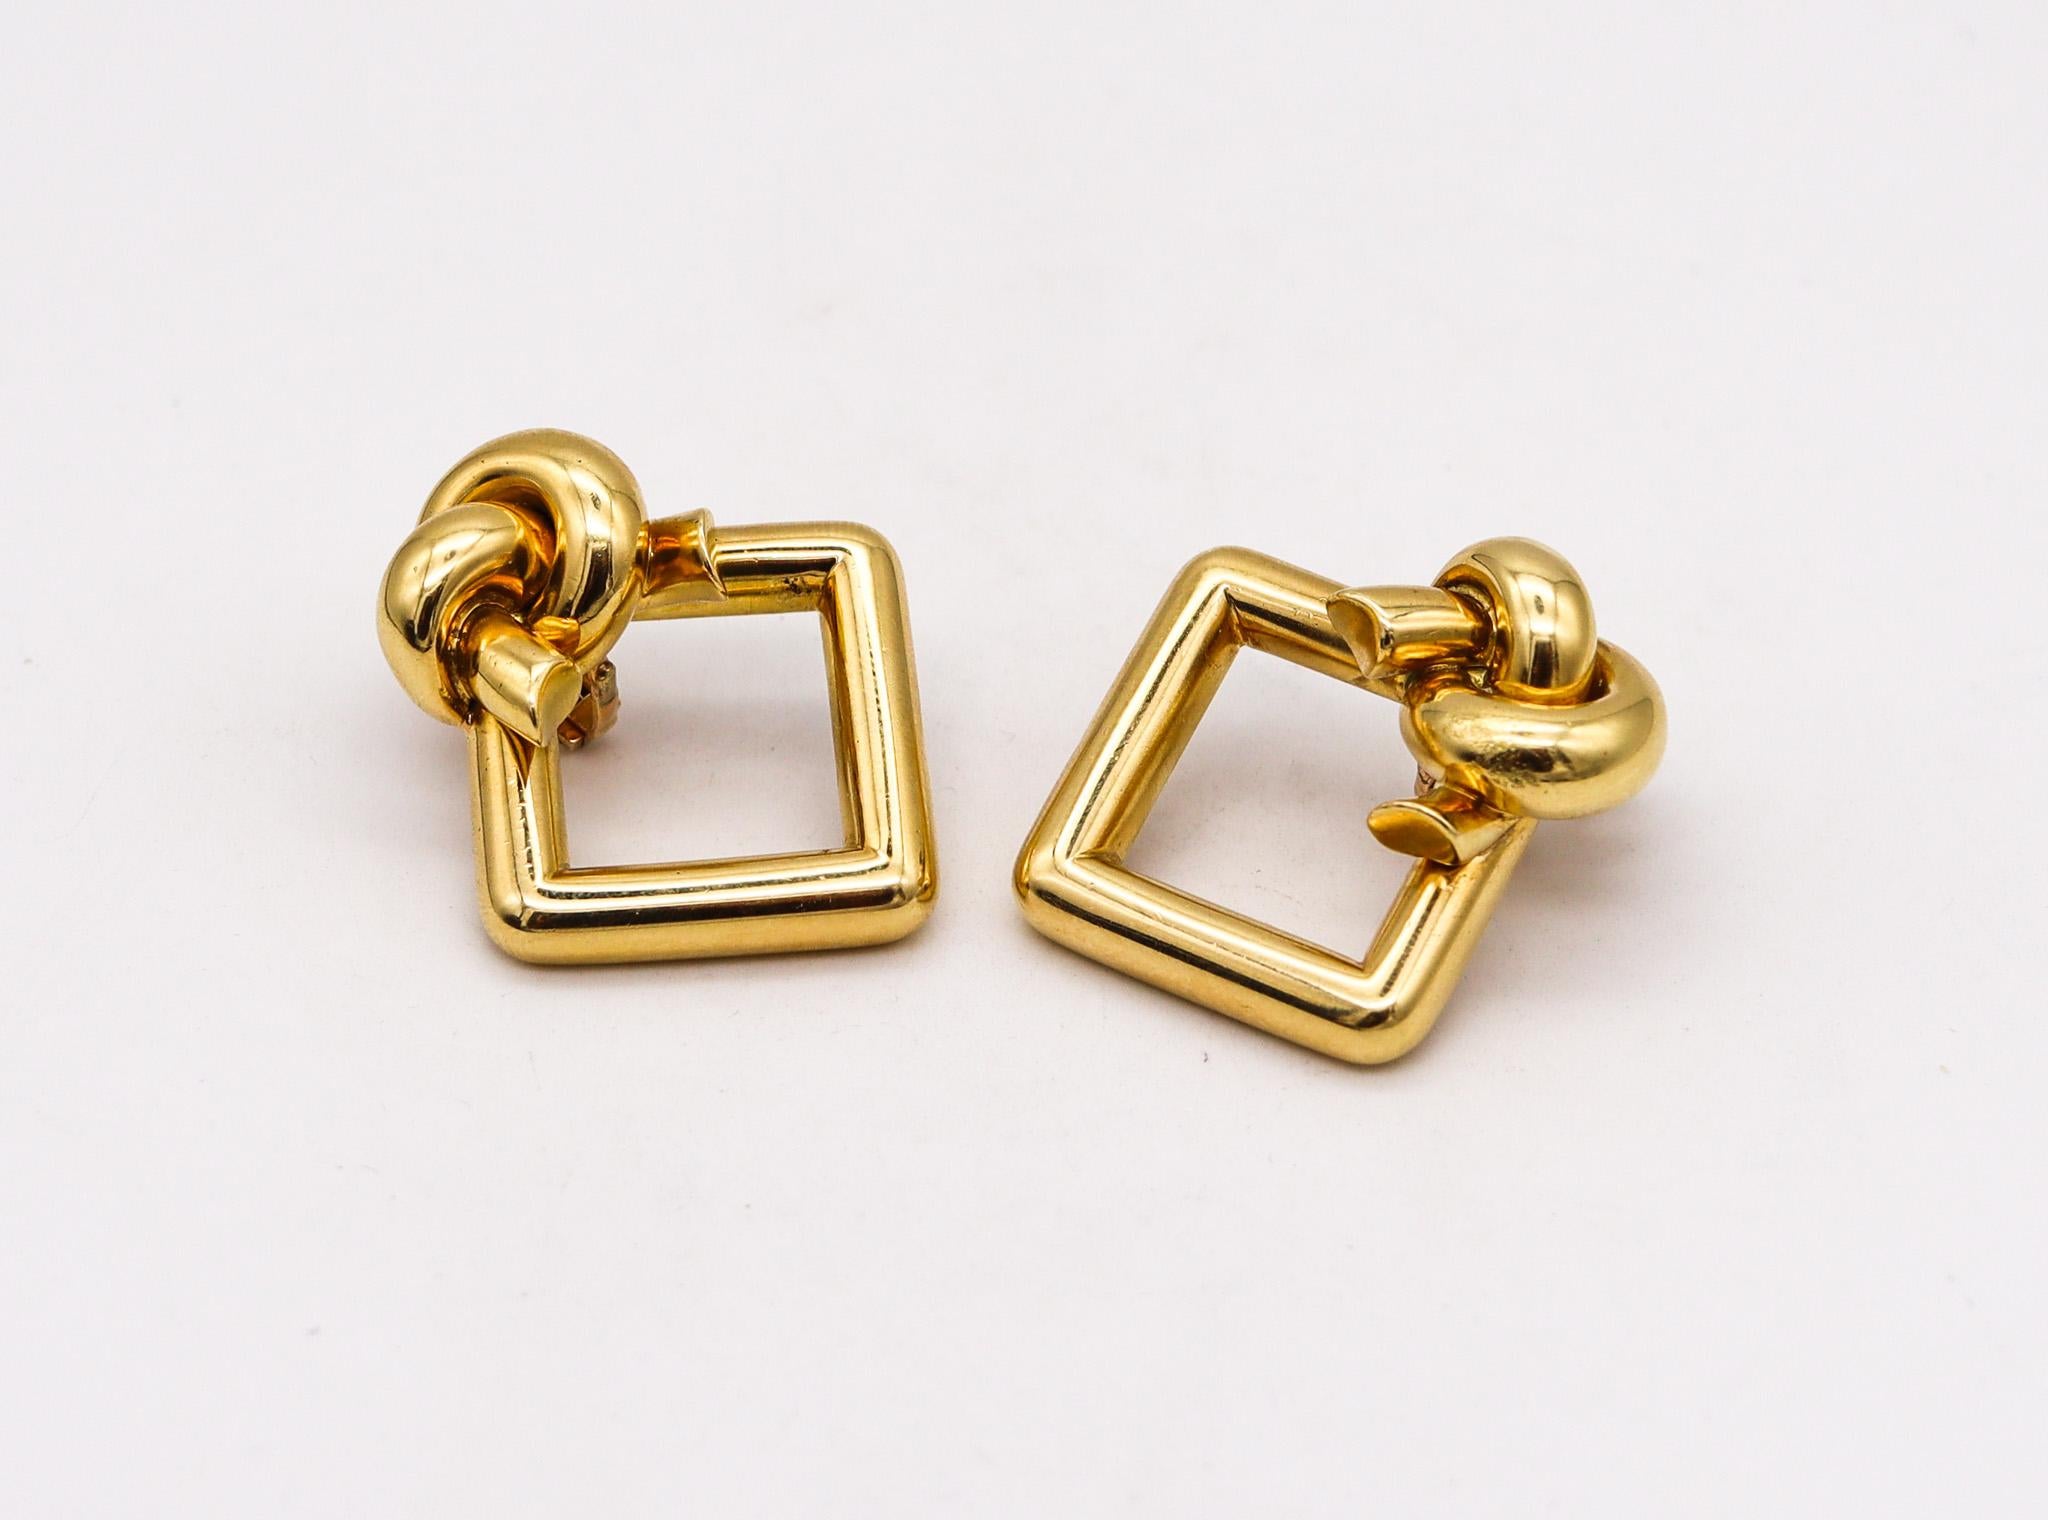 Geometric earrings designed by Cartier.

Great pair of modernist earrings with gorgeous geometric design. They was crafted by the jewelry house of Cartier, back in the 1970 with big squares and knots patterns in solid yellow gold of 18 karats.